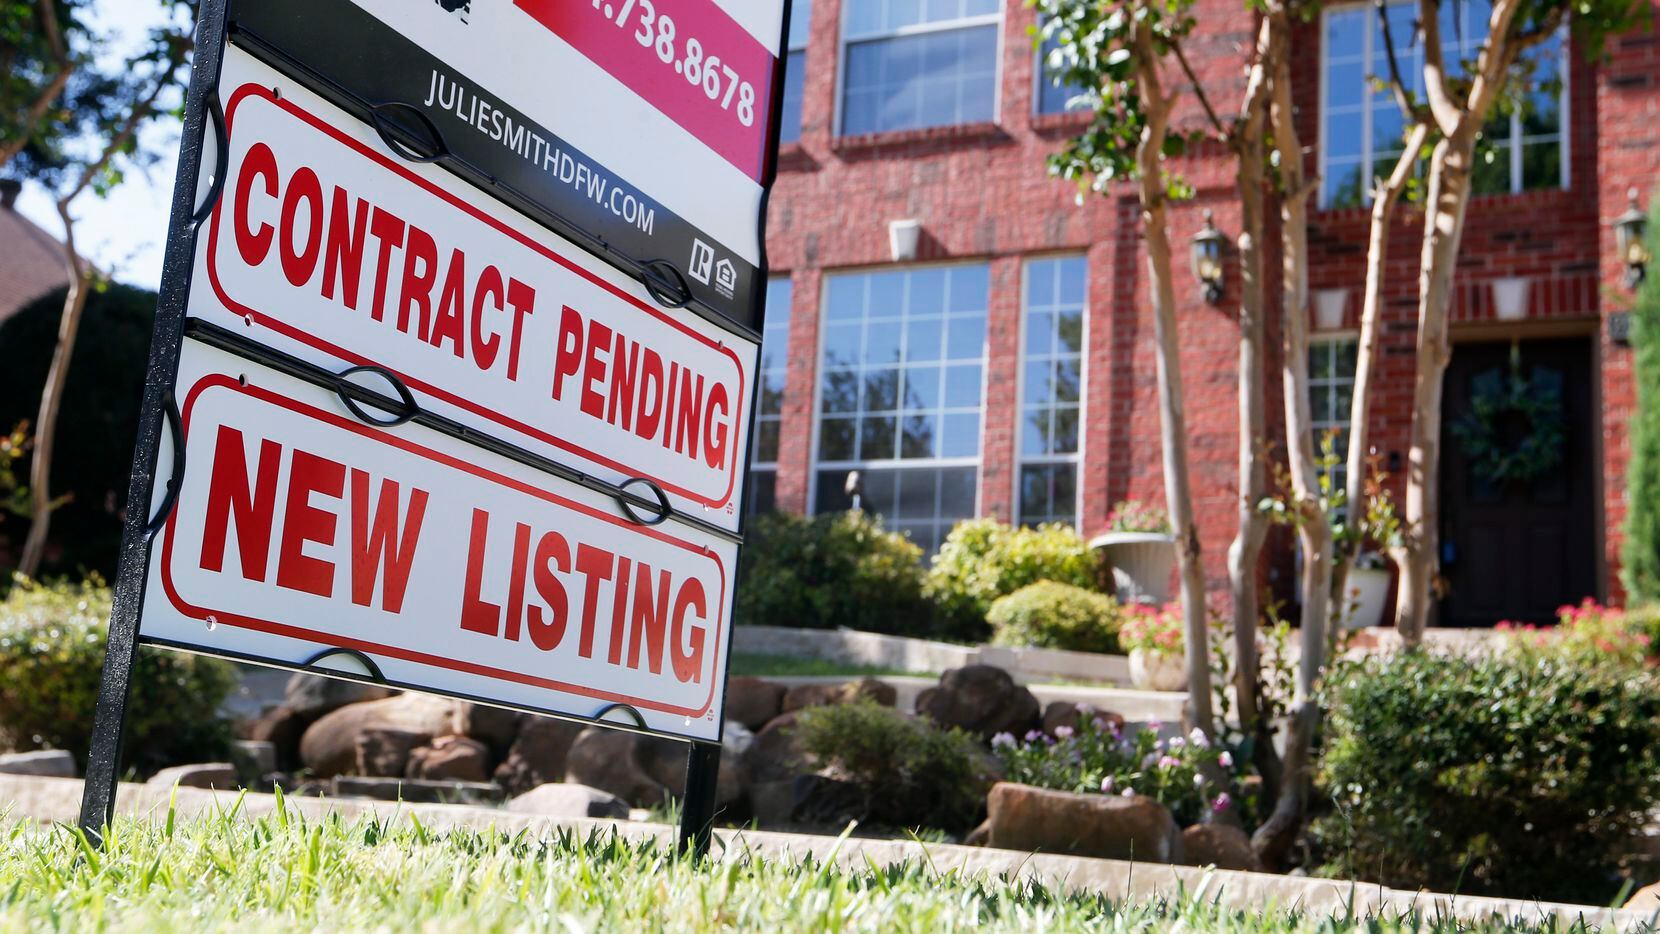 Dallas-Fort Worth has seen one of the biggest declines in home sales listings in the country.